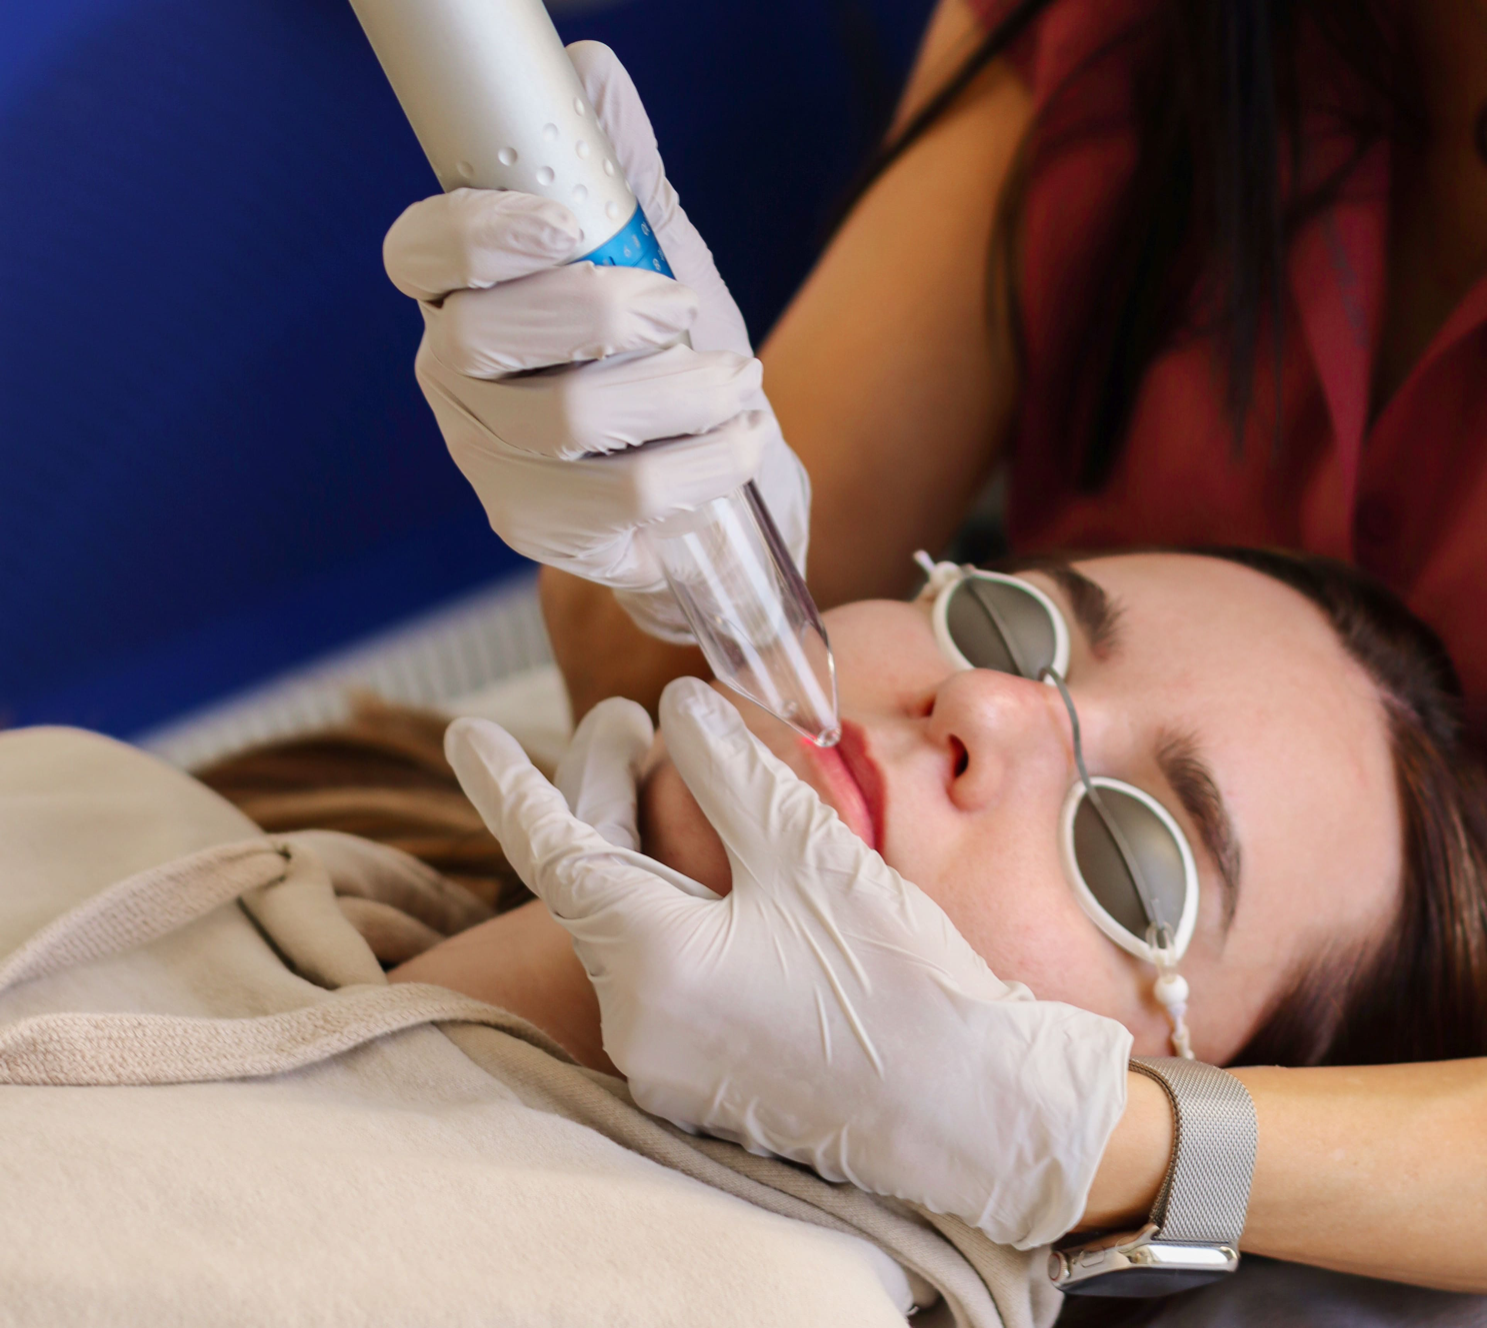 How Is The Procedure Of Permanent Lip Makeup Laser Removal Carried Out?